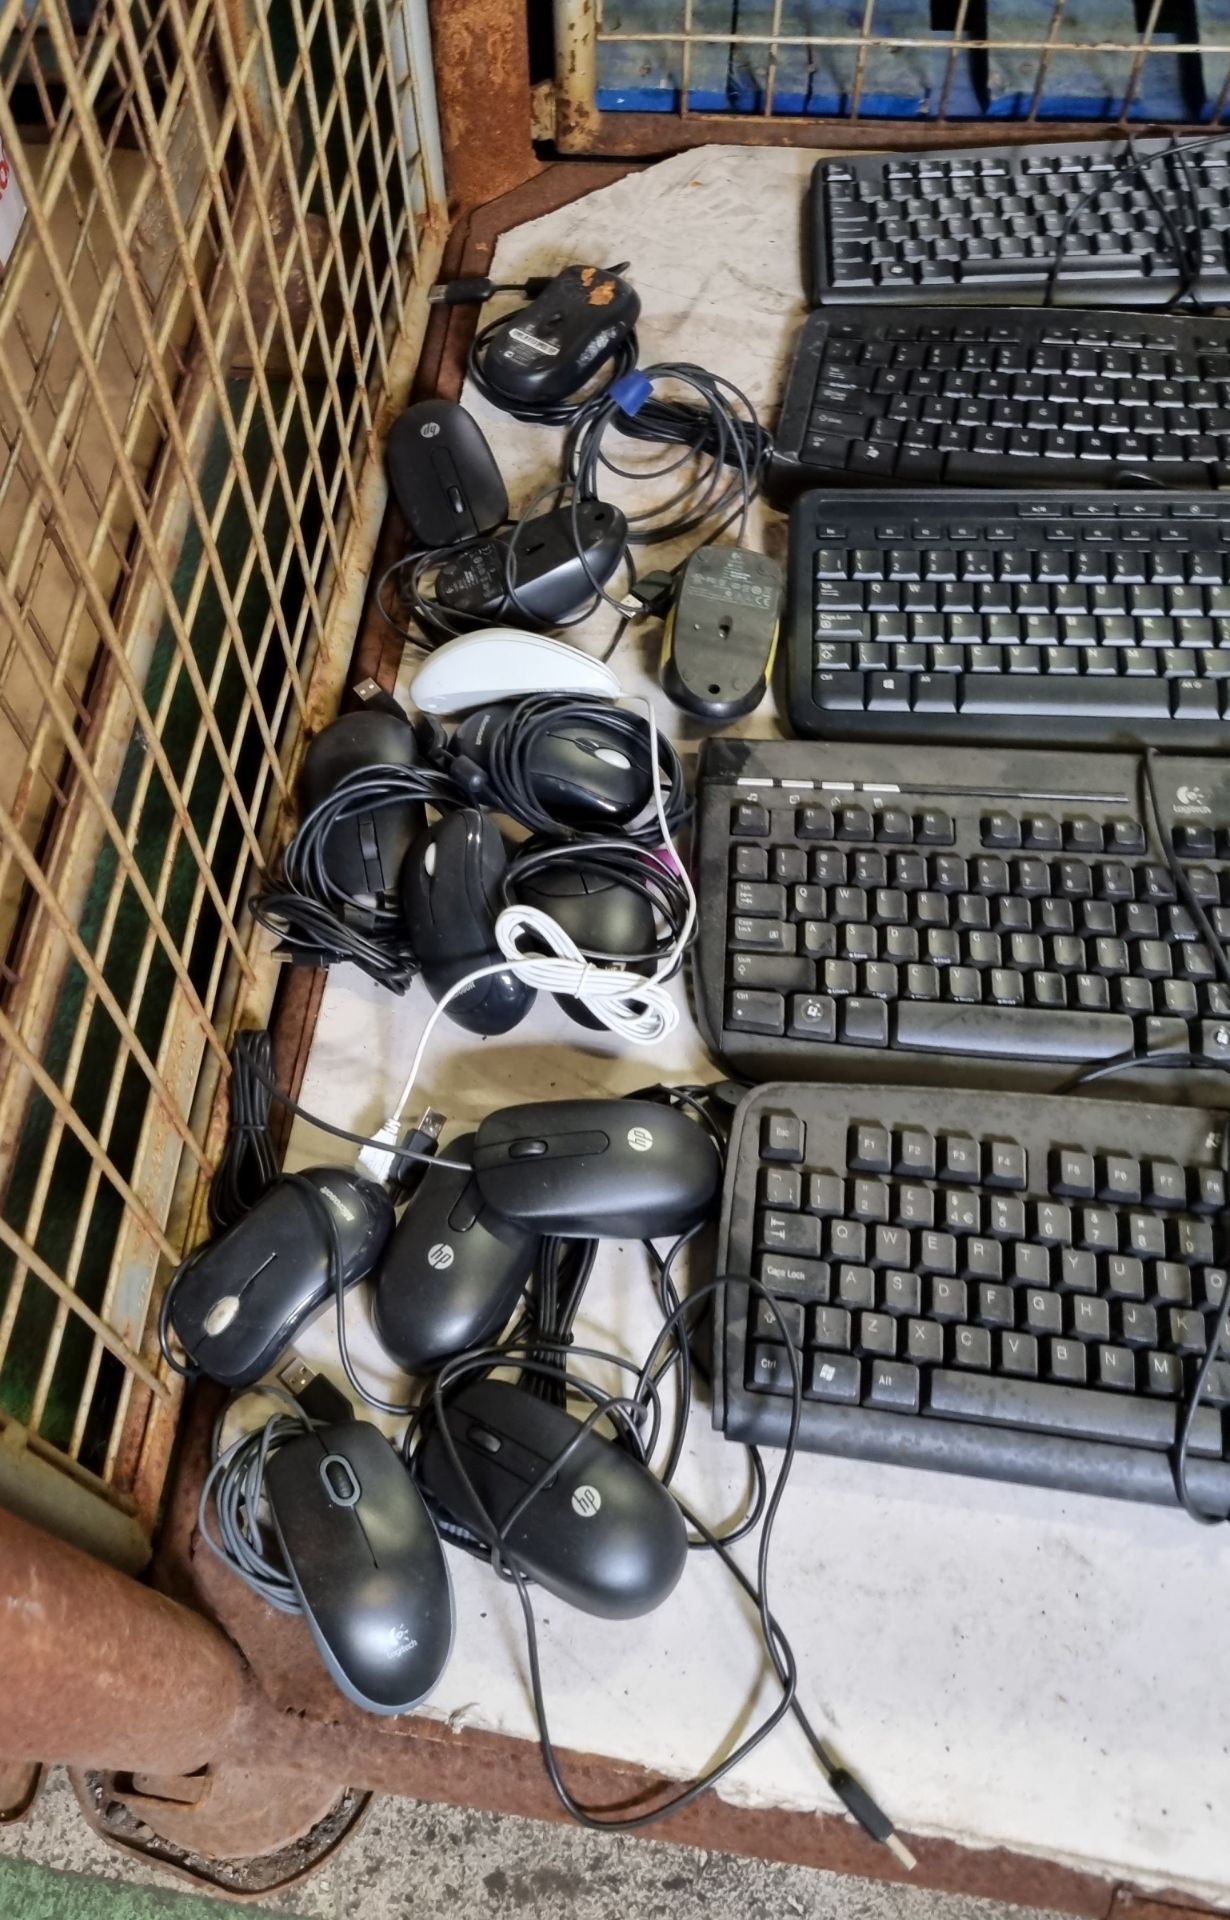 10x wired and wireless keyboards - 13x wired mice - Image 5 of 5